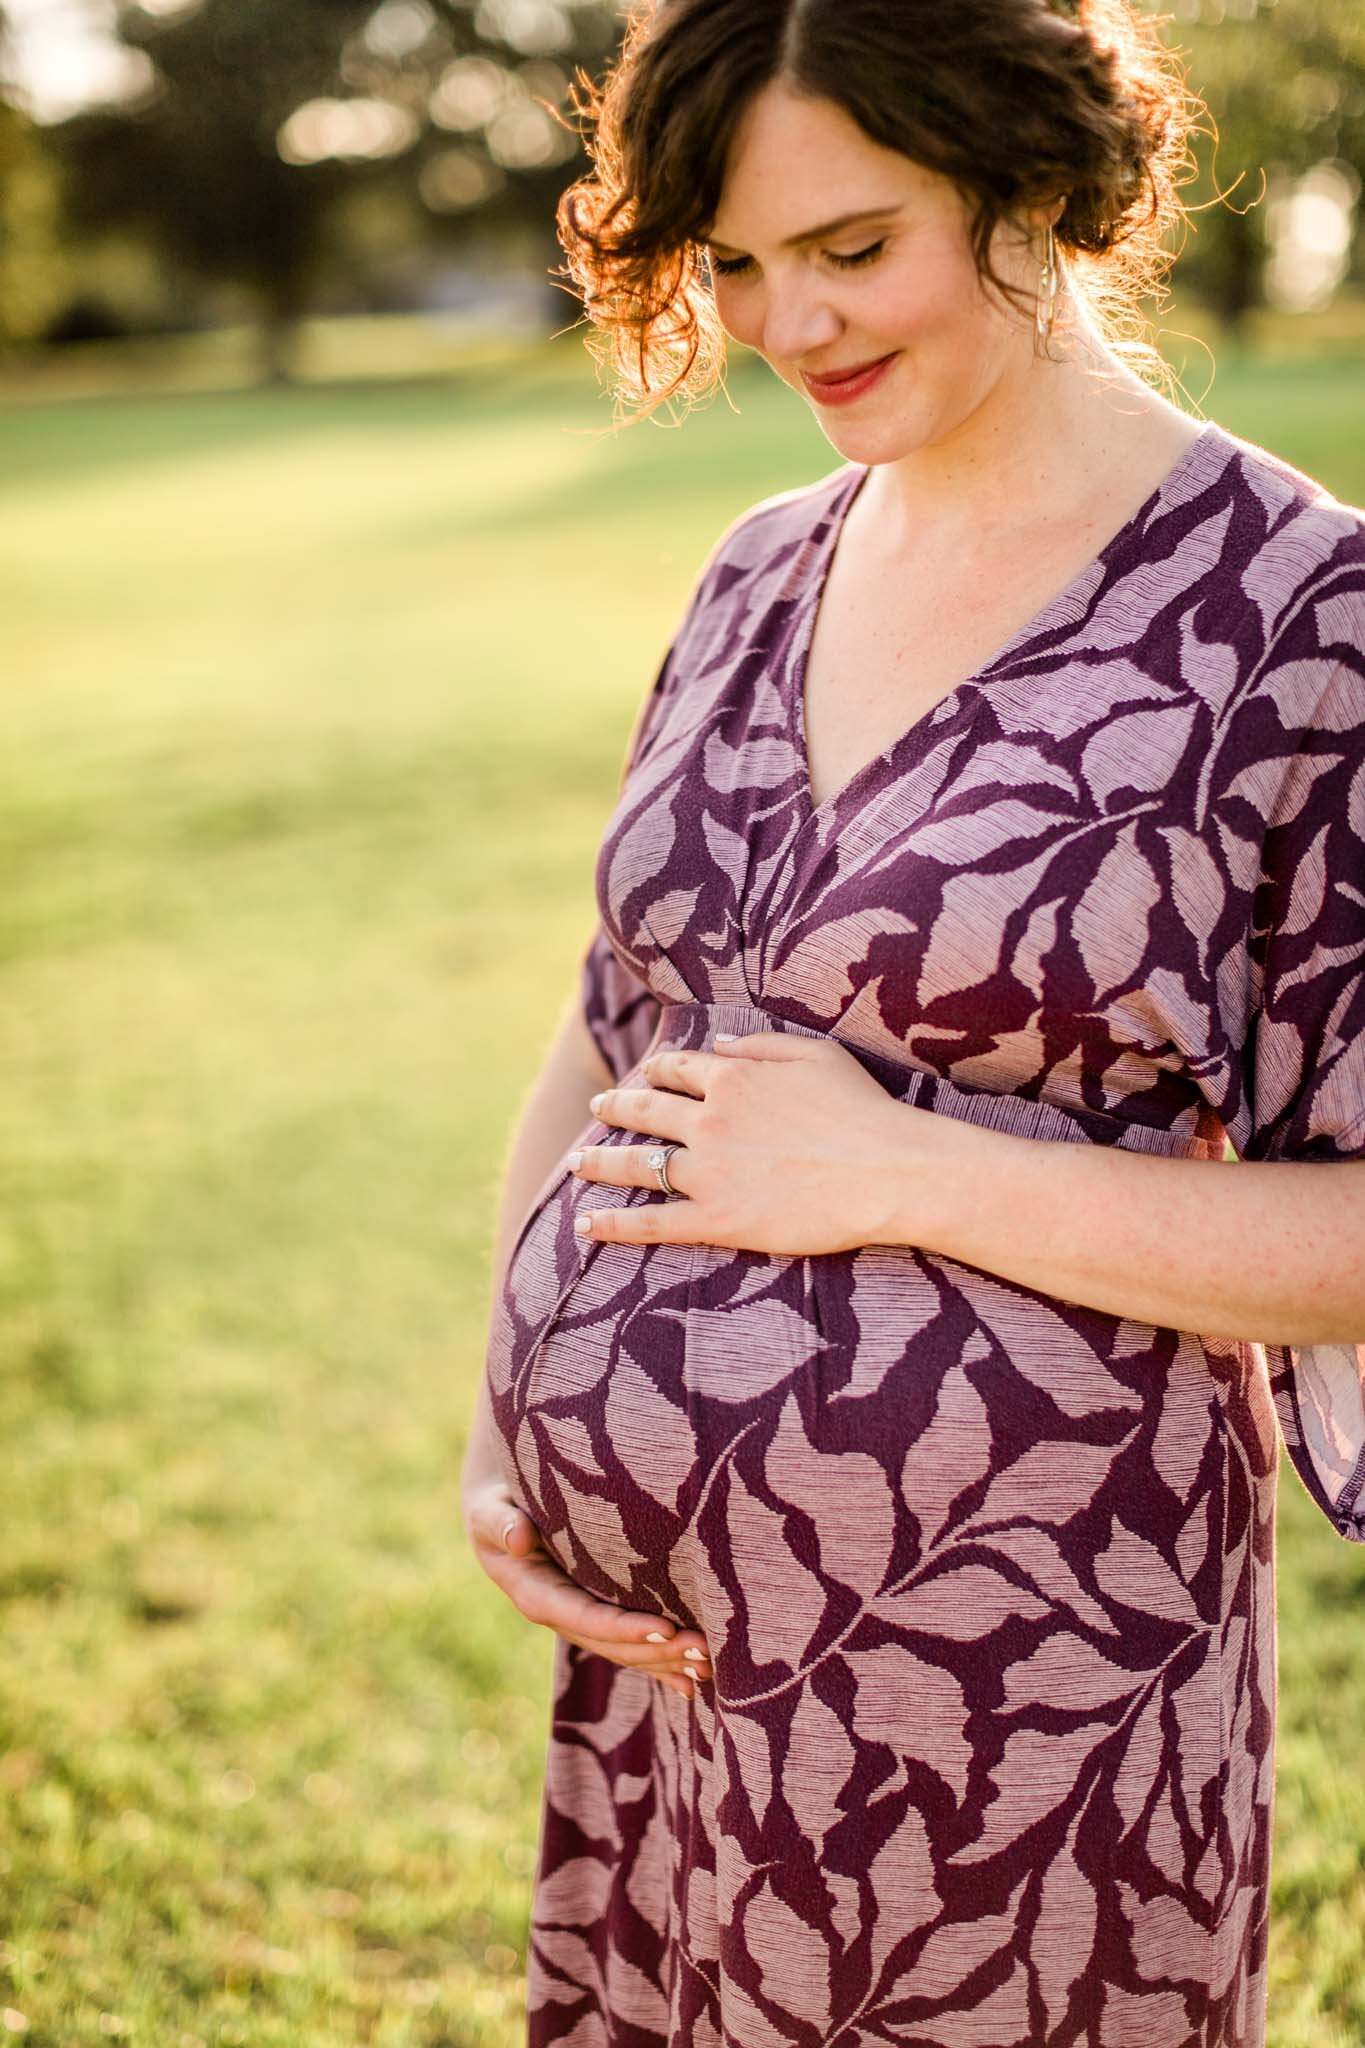 Outdoor sunset maternity photography at Dix Park | Raleigh Maternity Photographer | By G. Lin Photography